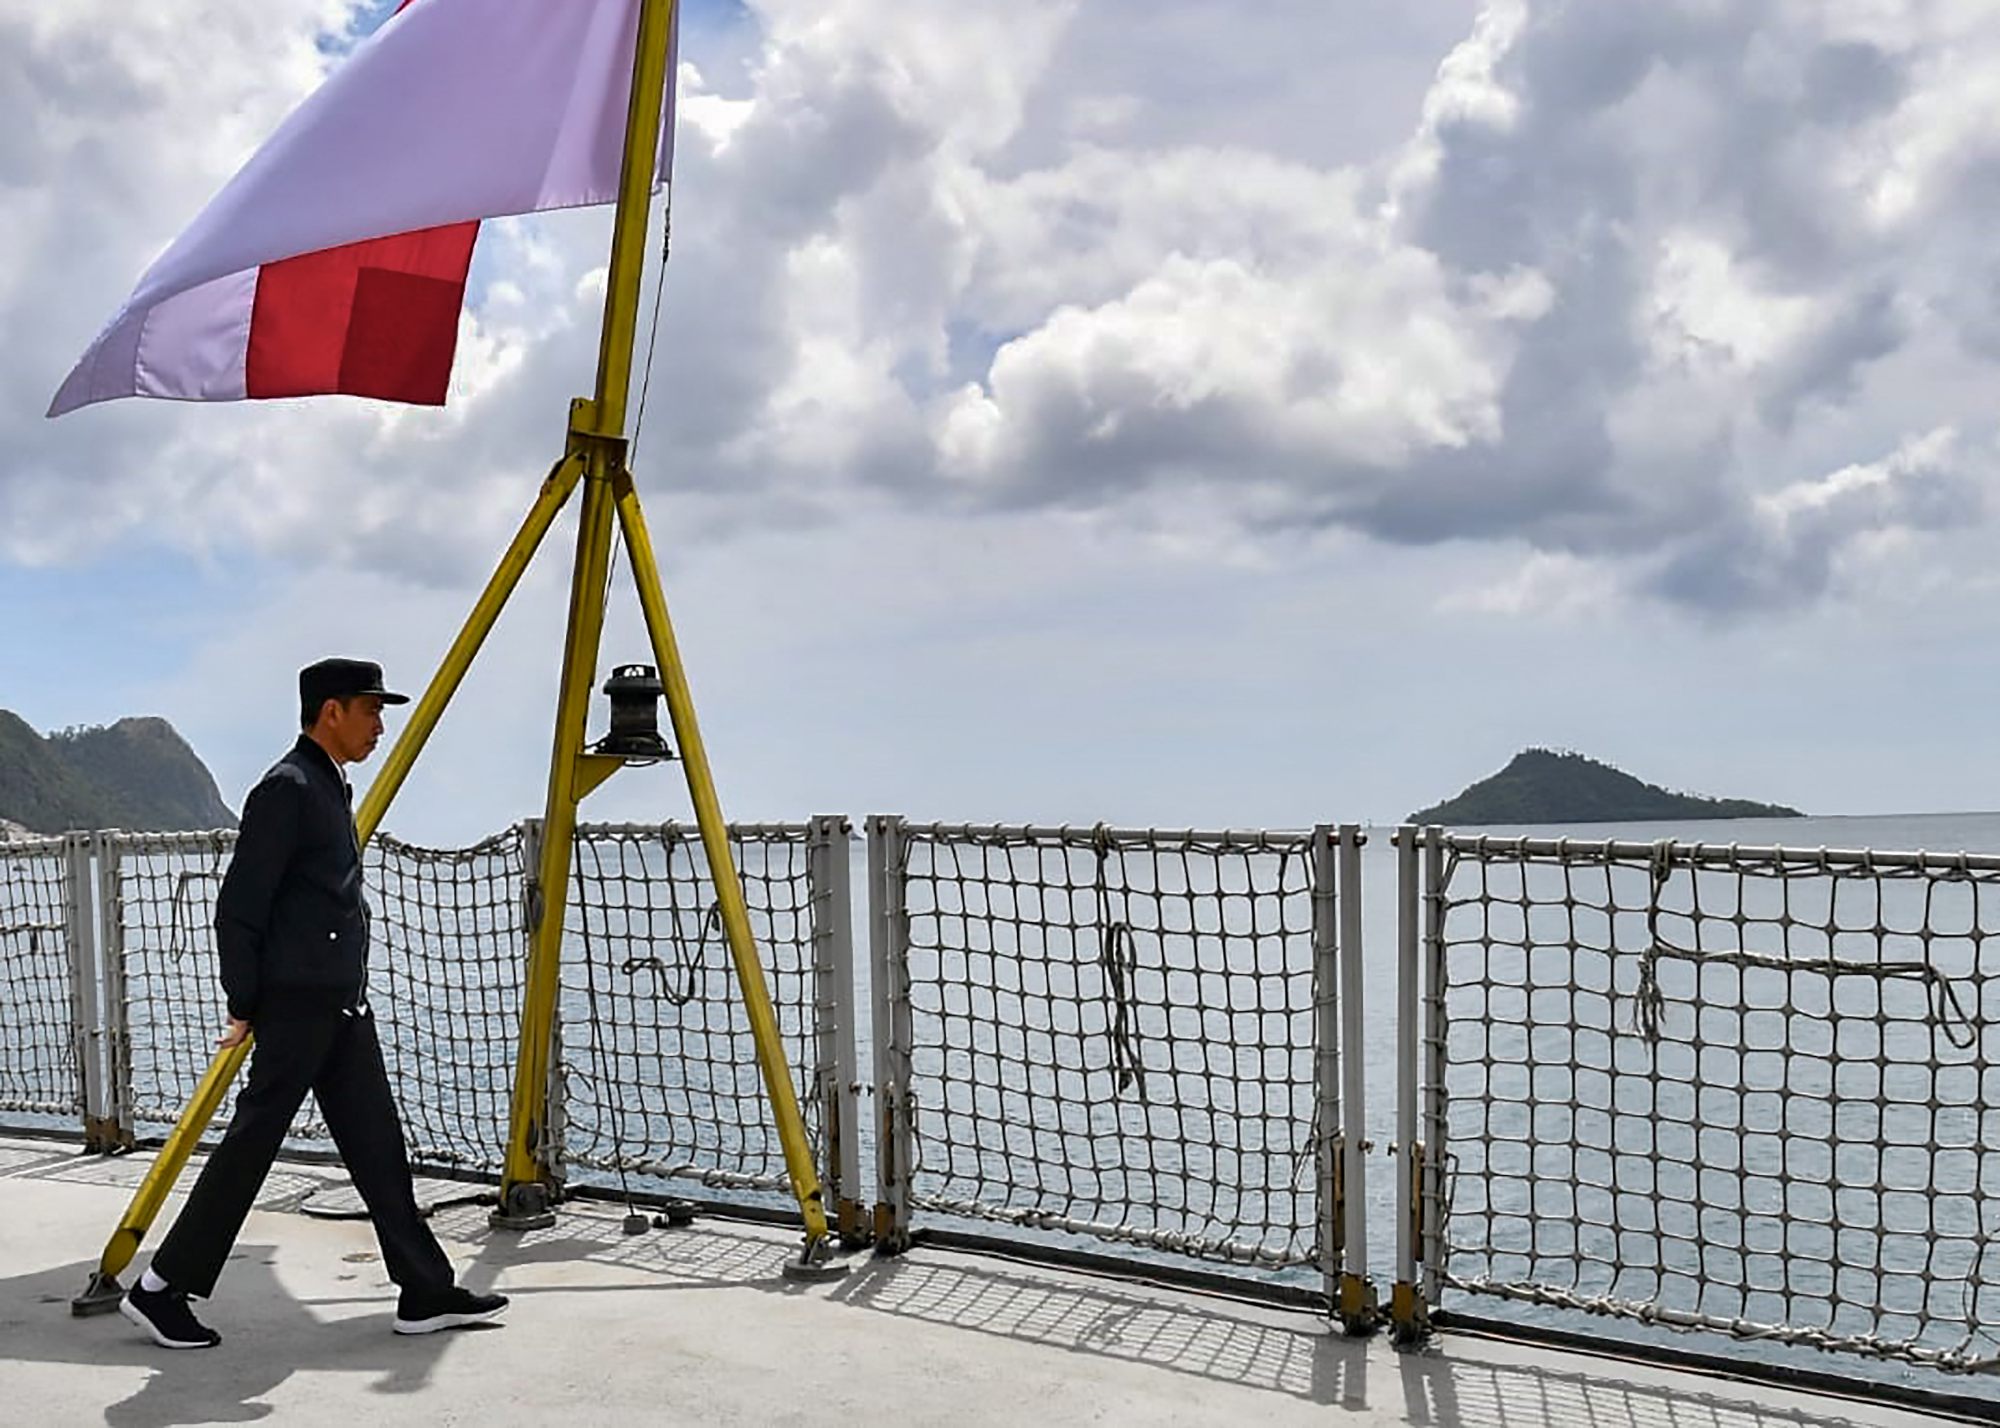 Indonesia’s President Joko Widodo walks past the country’s flag on a navy ship during his visit to a military base in the Natuna Islands, which border the South China Sea. Photo: Presidential Palance/AFP